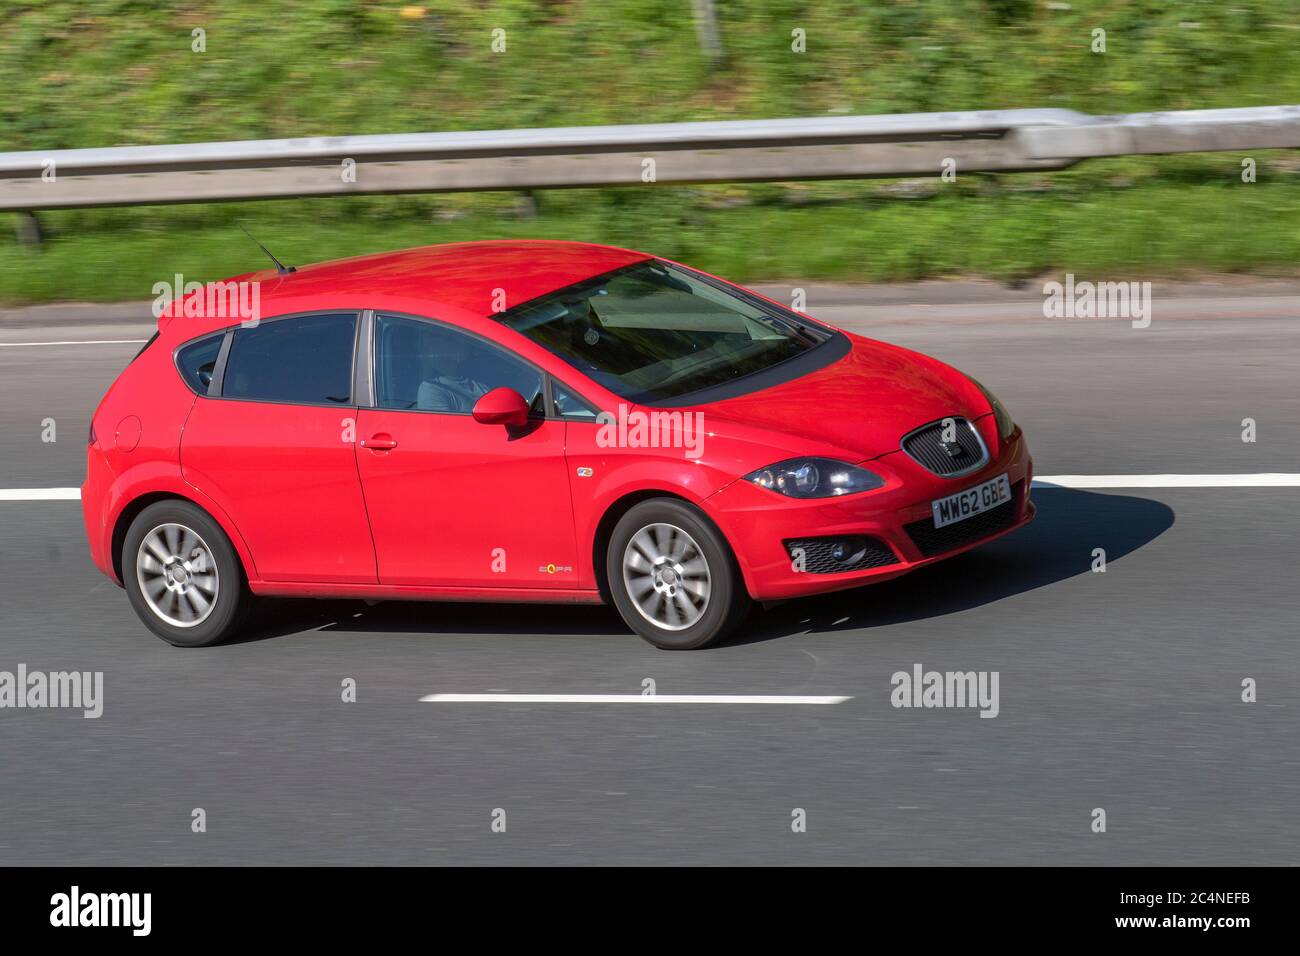 2012 red SEAT Leon SE Copa CR TDI;Vehicular traffic moving vehicles, cars driving vehicle on UK roads, motors, motoring on the M6 motorway highway network. Stock Photo